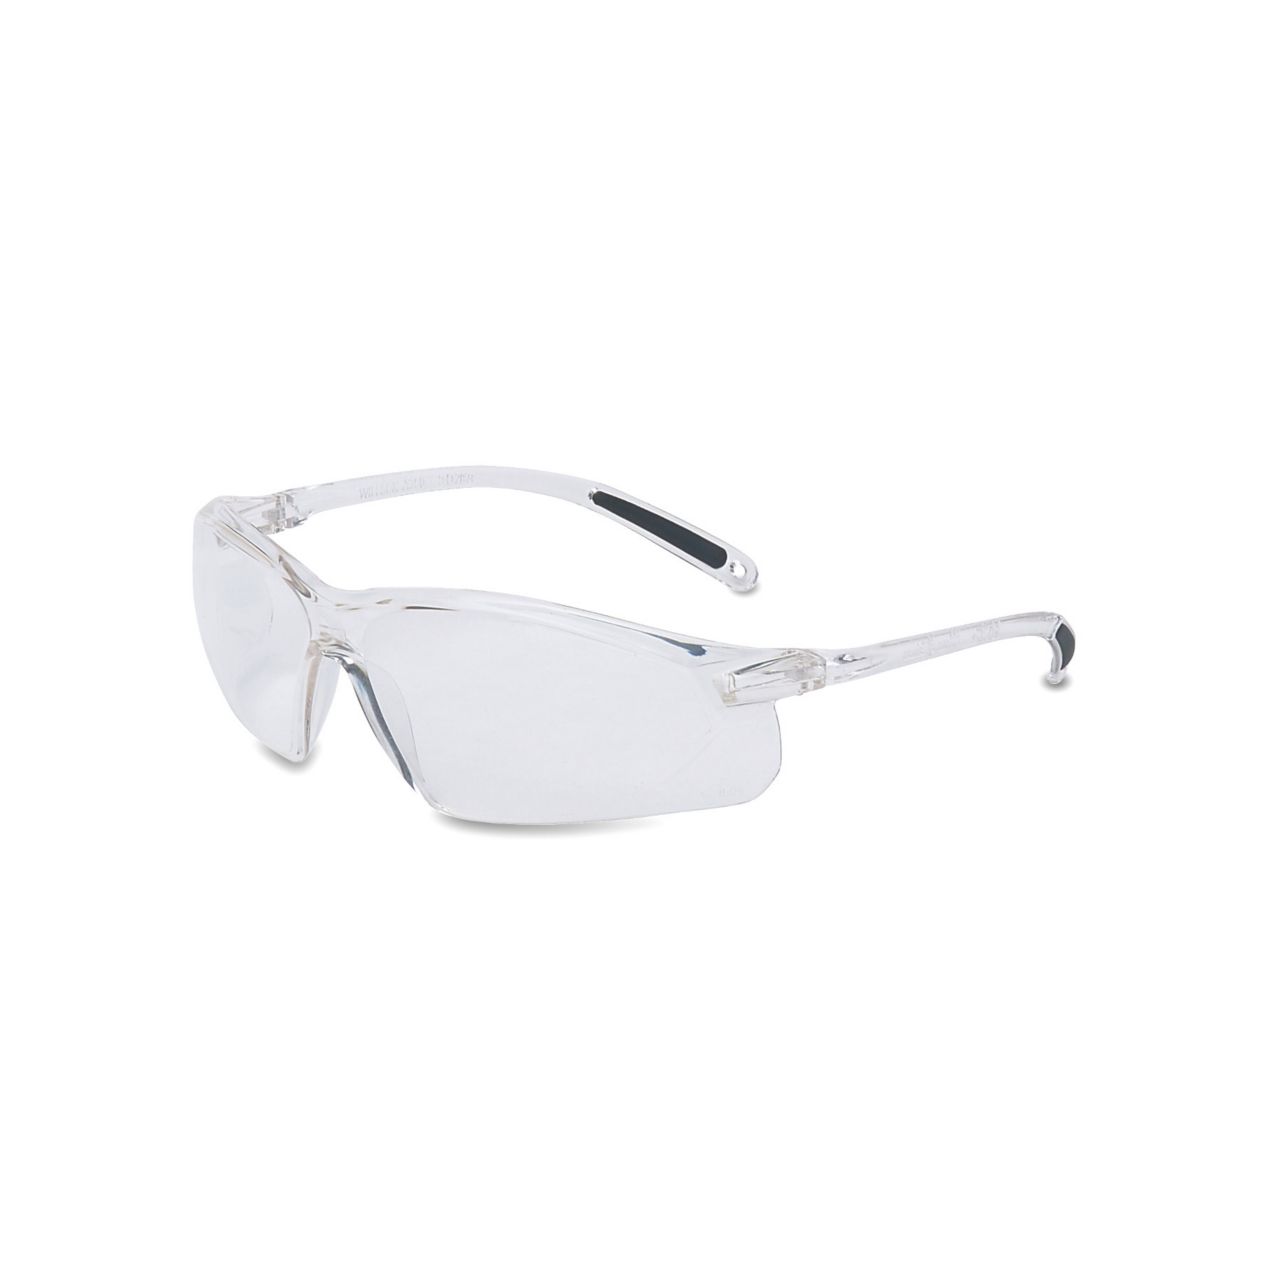 UVEX 700 Series Clear Safety Glasses